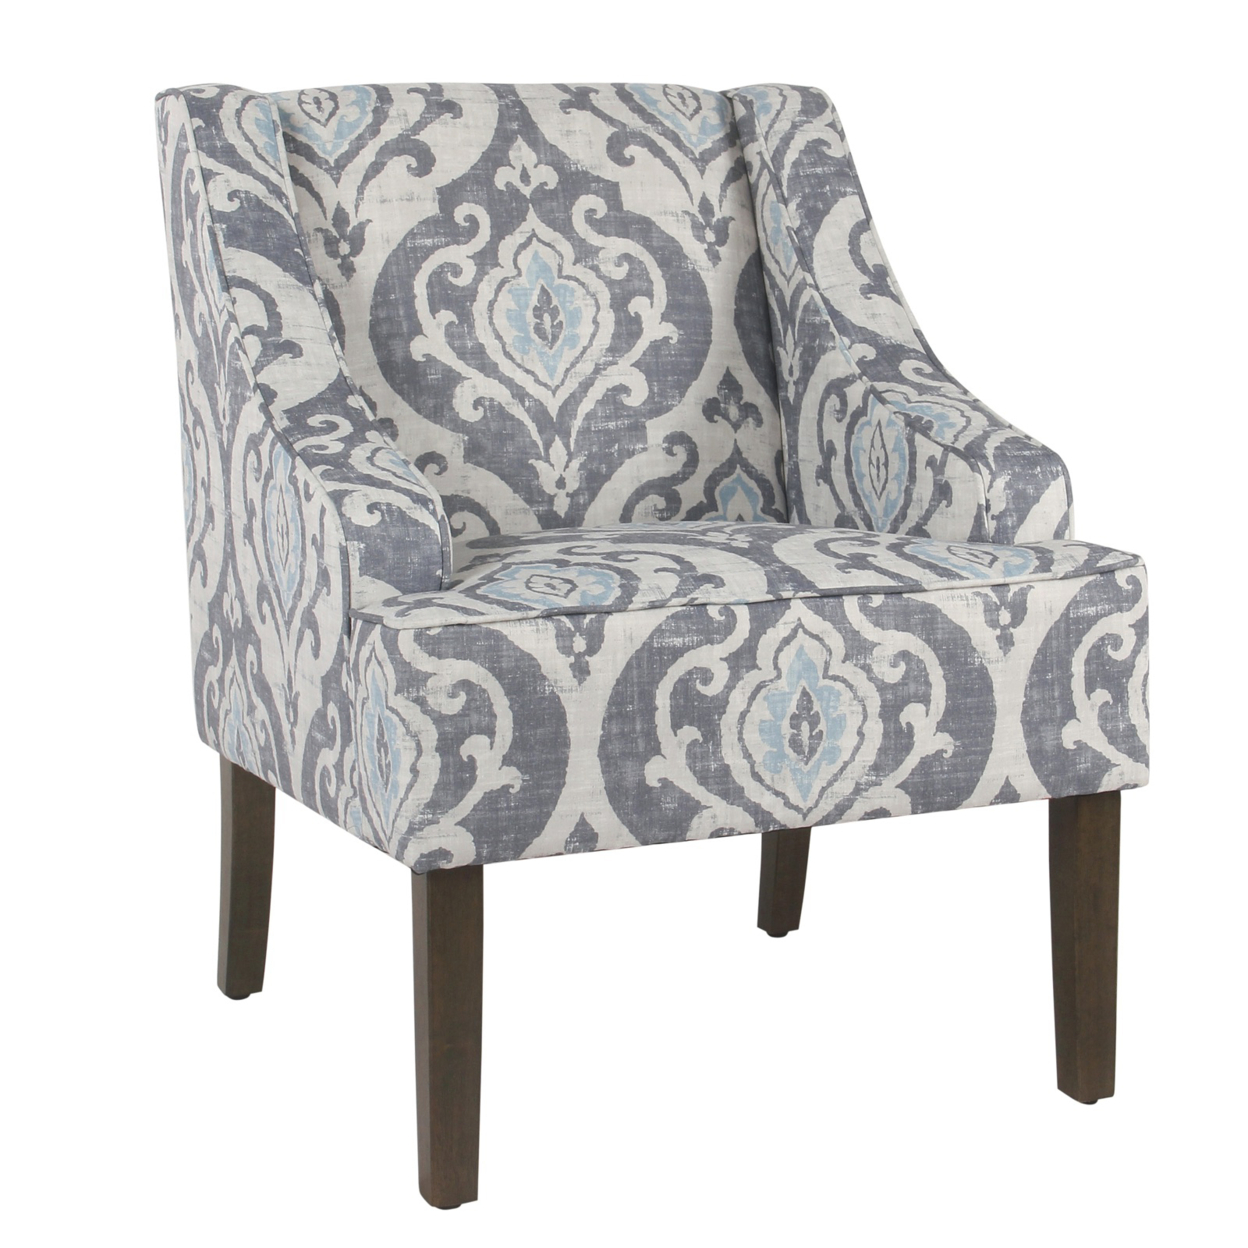 Fabric Upholstered Wooden Accent Chair With Swooping Armrests And Damask Pattern Design, Multicolor- Saltoro Sherpi